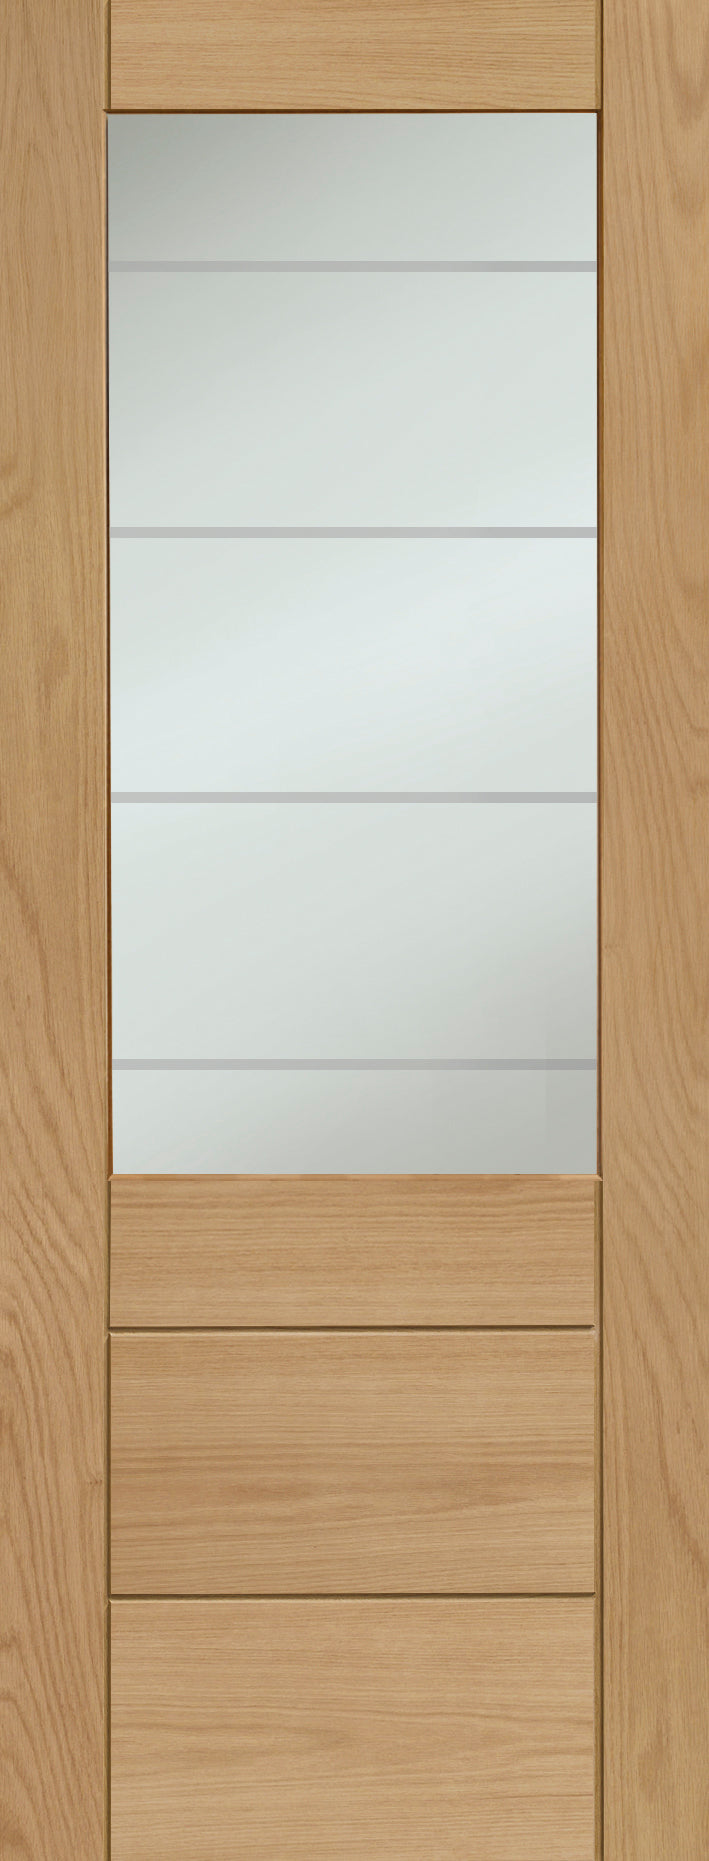 Palermo 2XG Internal Oak Fire Door with Clear Etched Glass